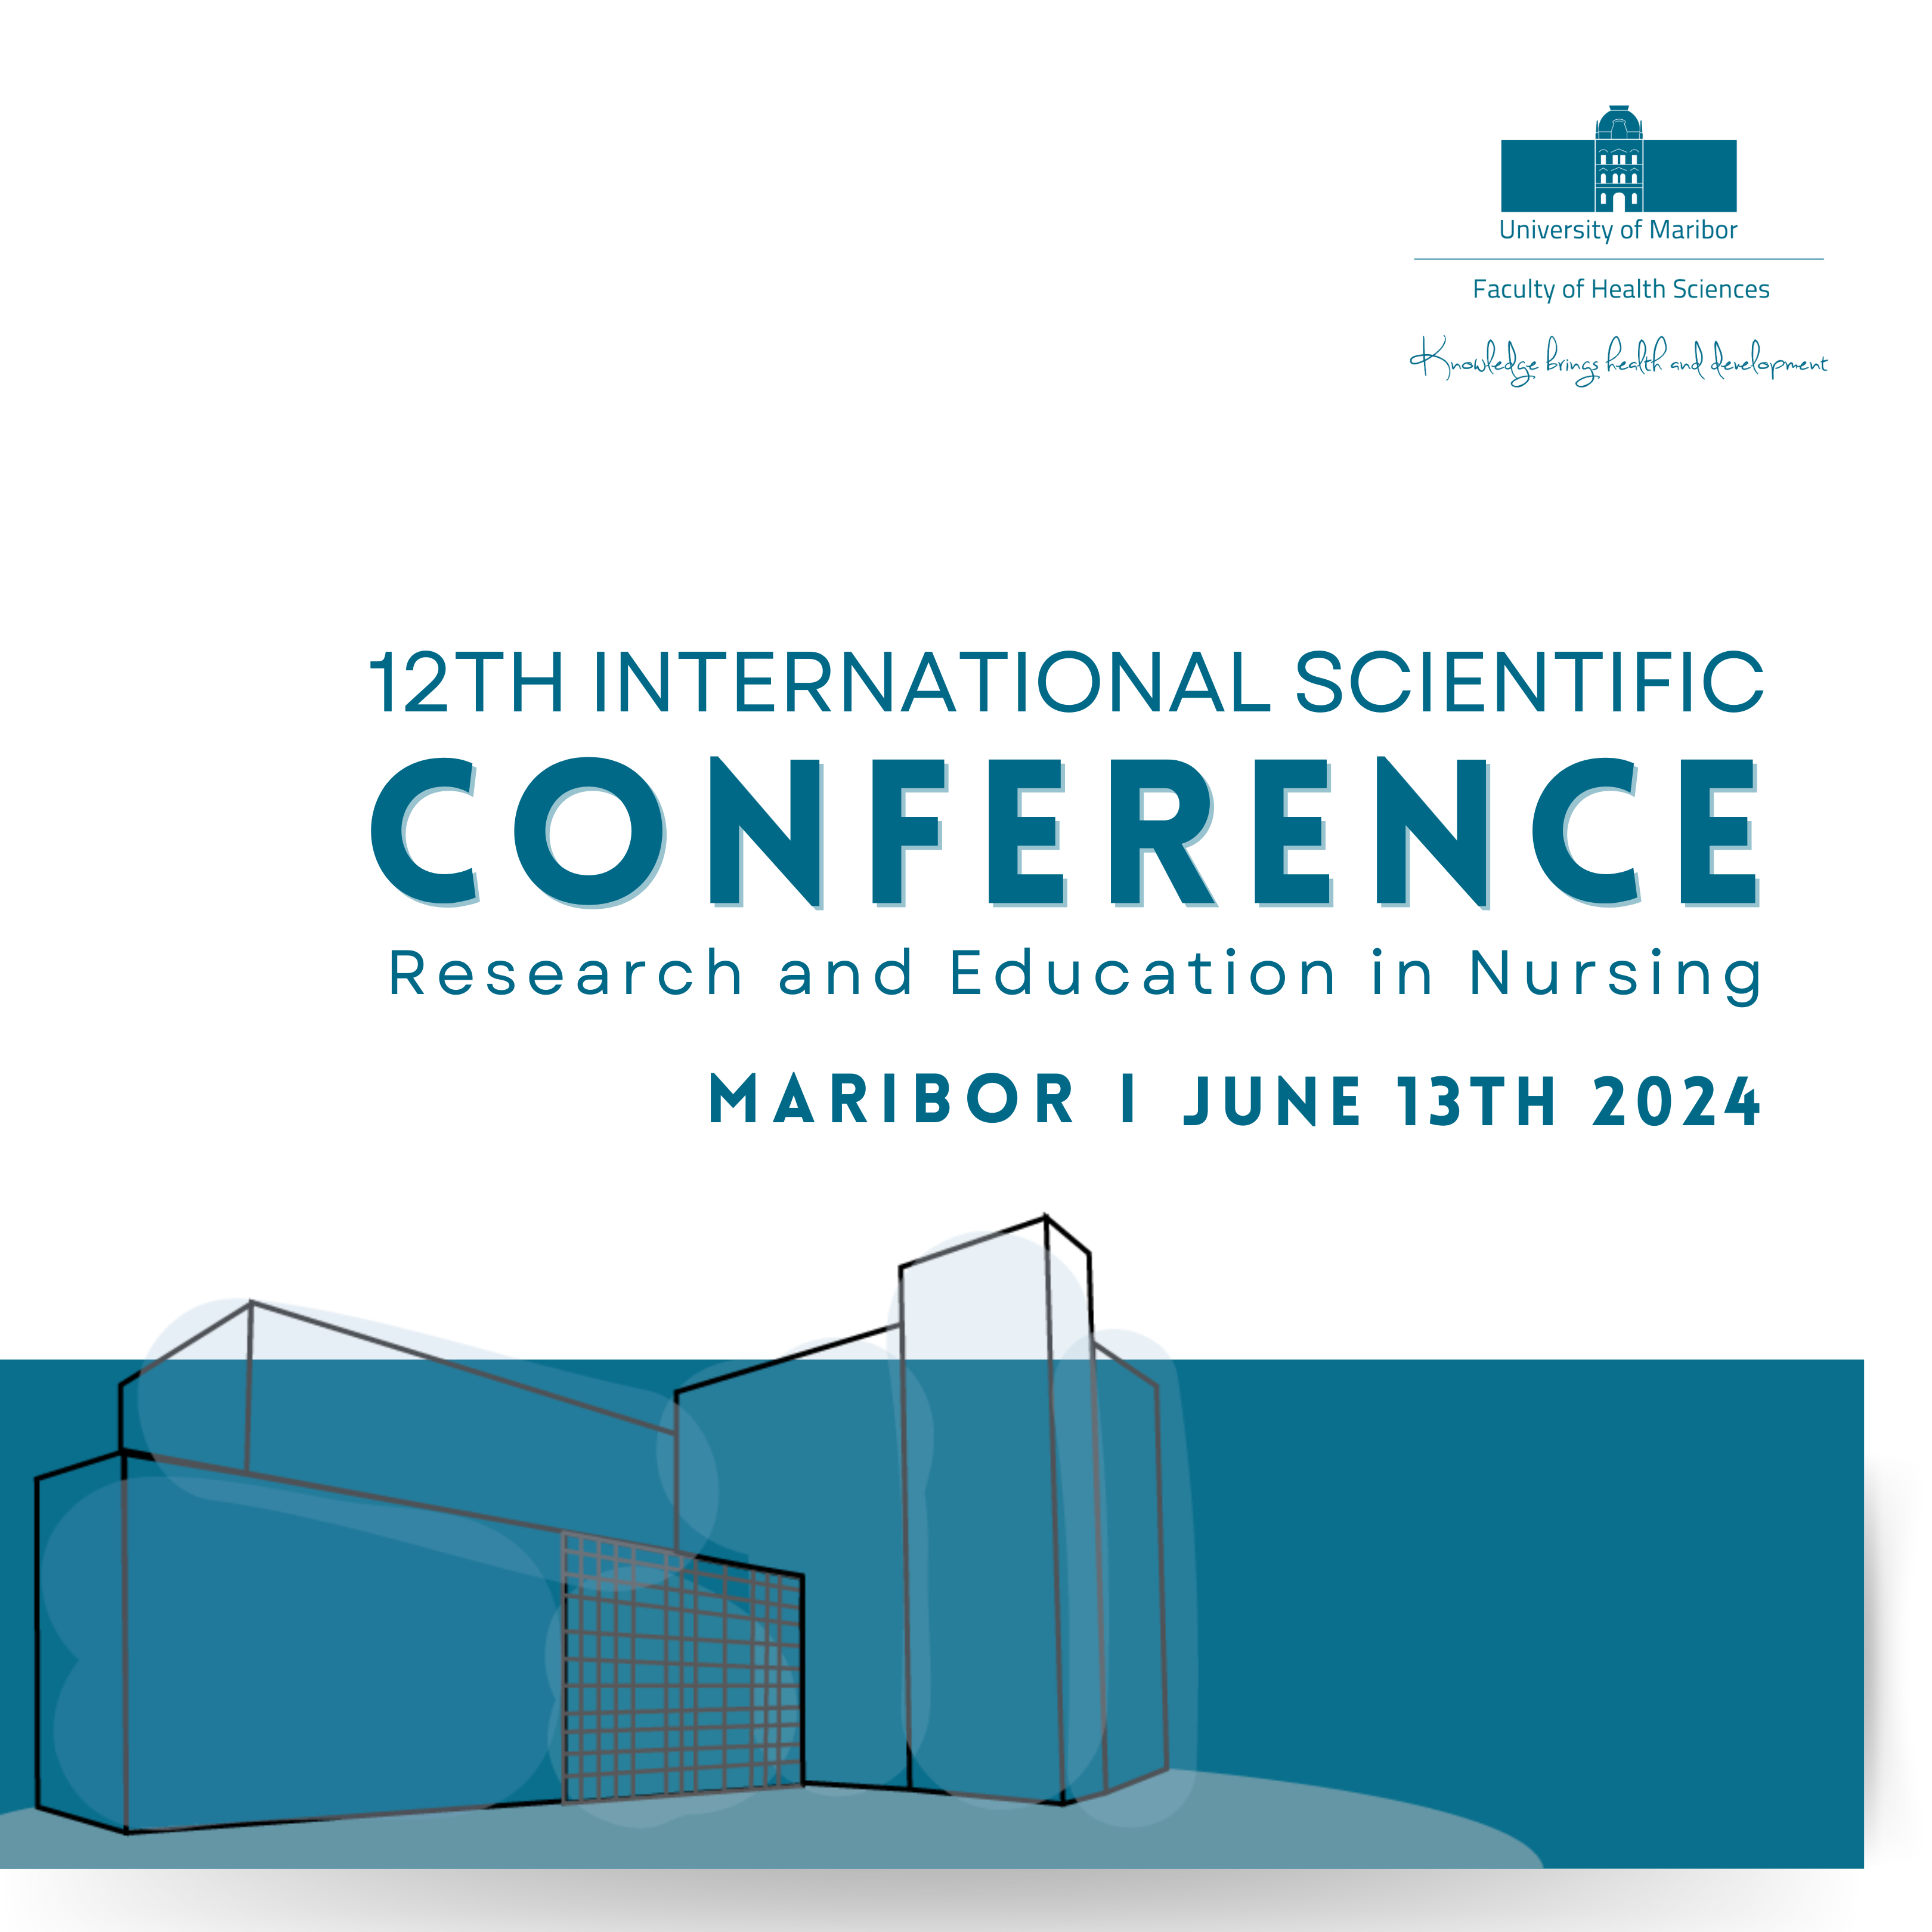 12TH INTERNATIONAL SCIENTIFIC CONFERENCE Research and Education in Nursing 2024